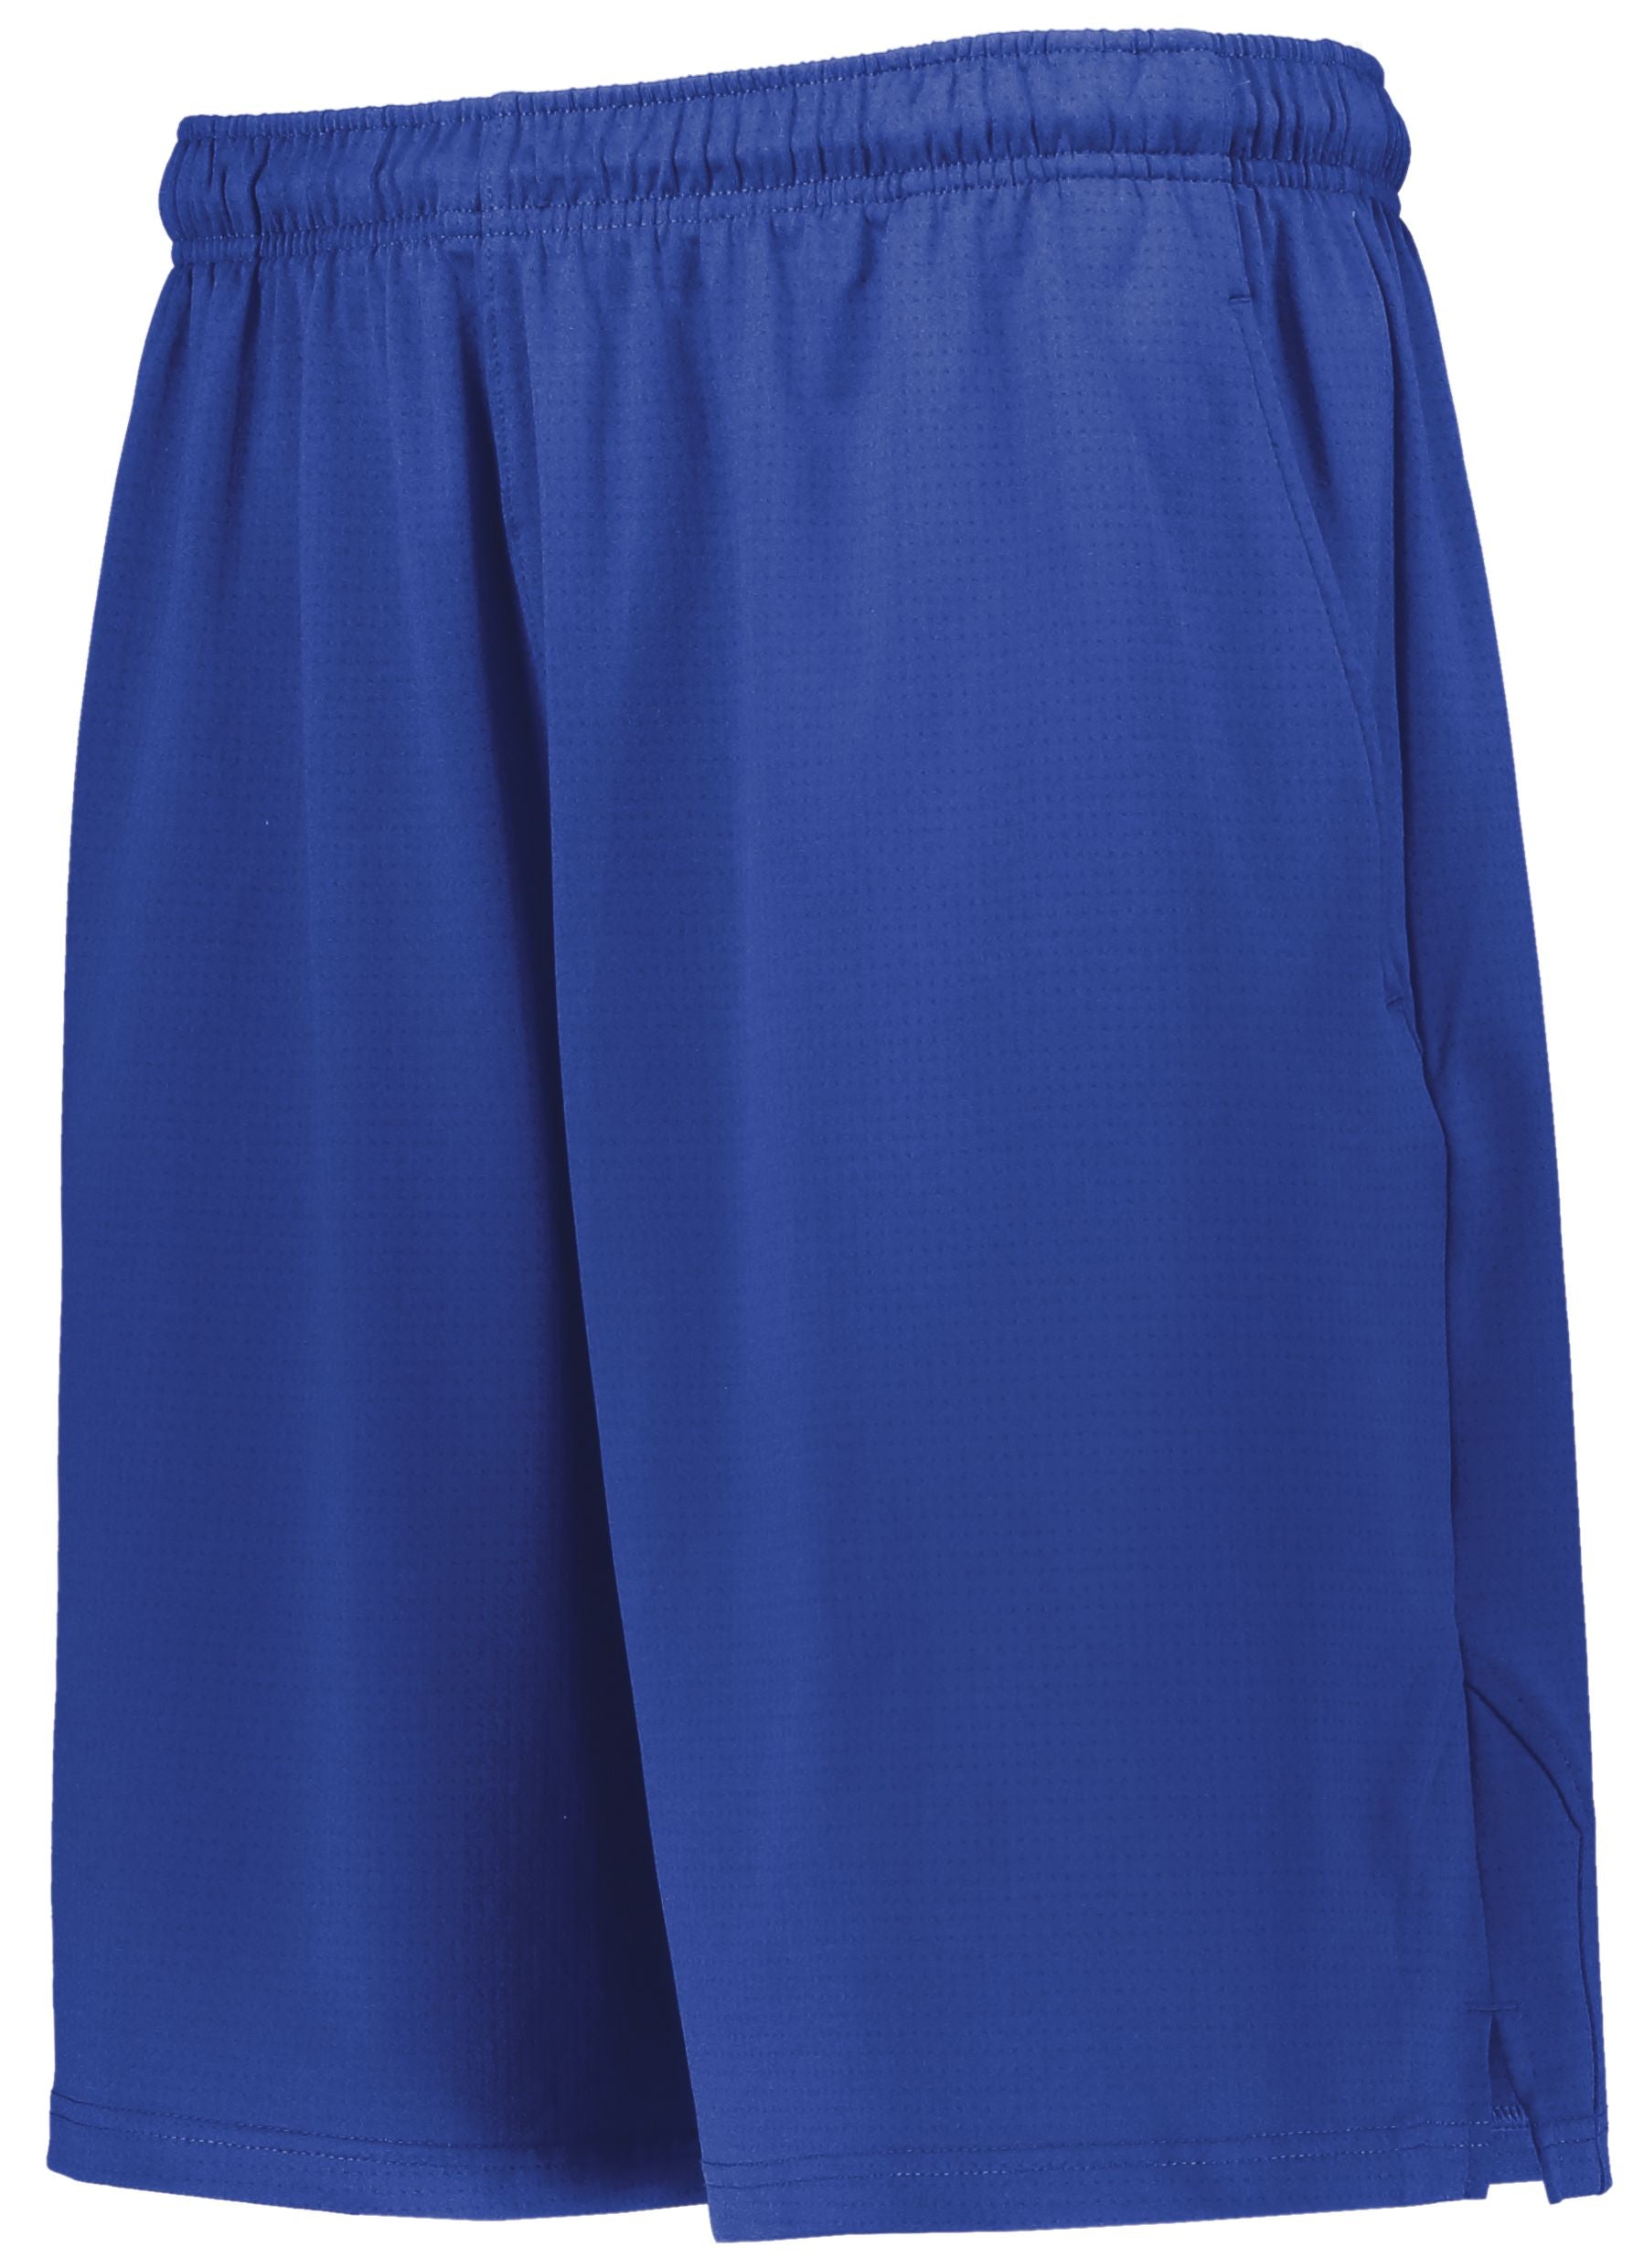 Russell Athletic Team Driven Coaches Shorts in Royal  -Part of the Adult, Adult-Shorts, Russell-Athletic-Products product lines at KanaleyCreations.com